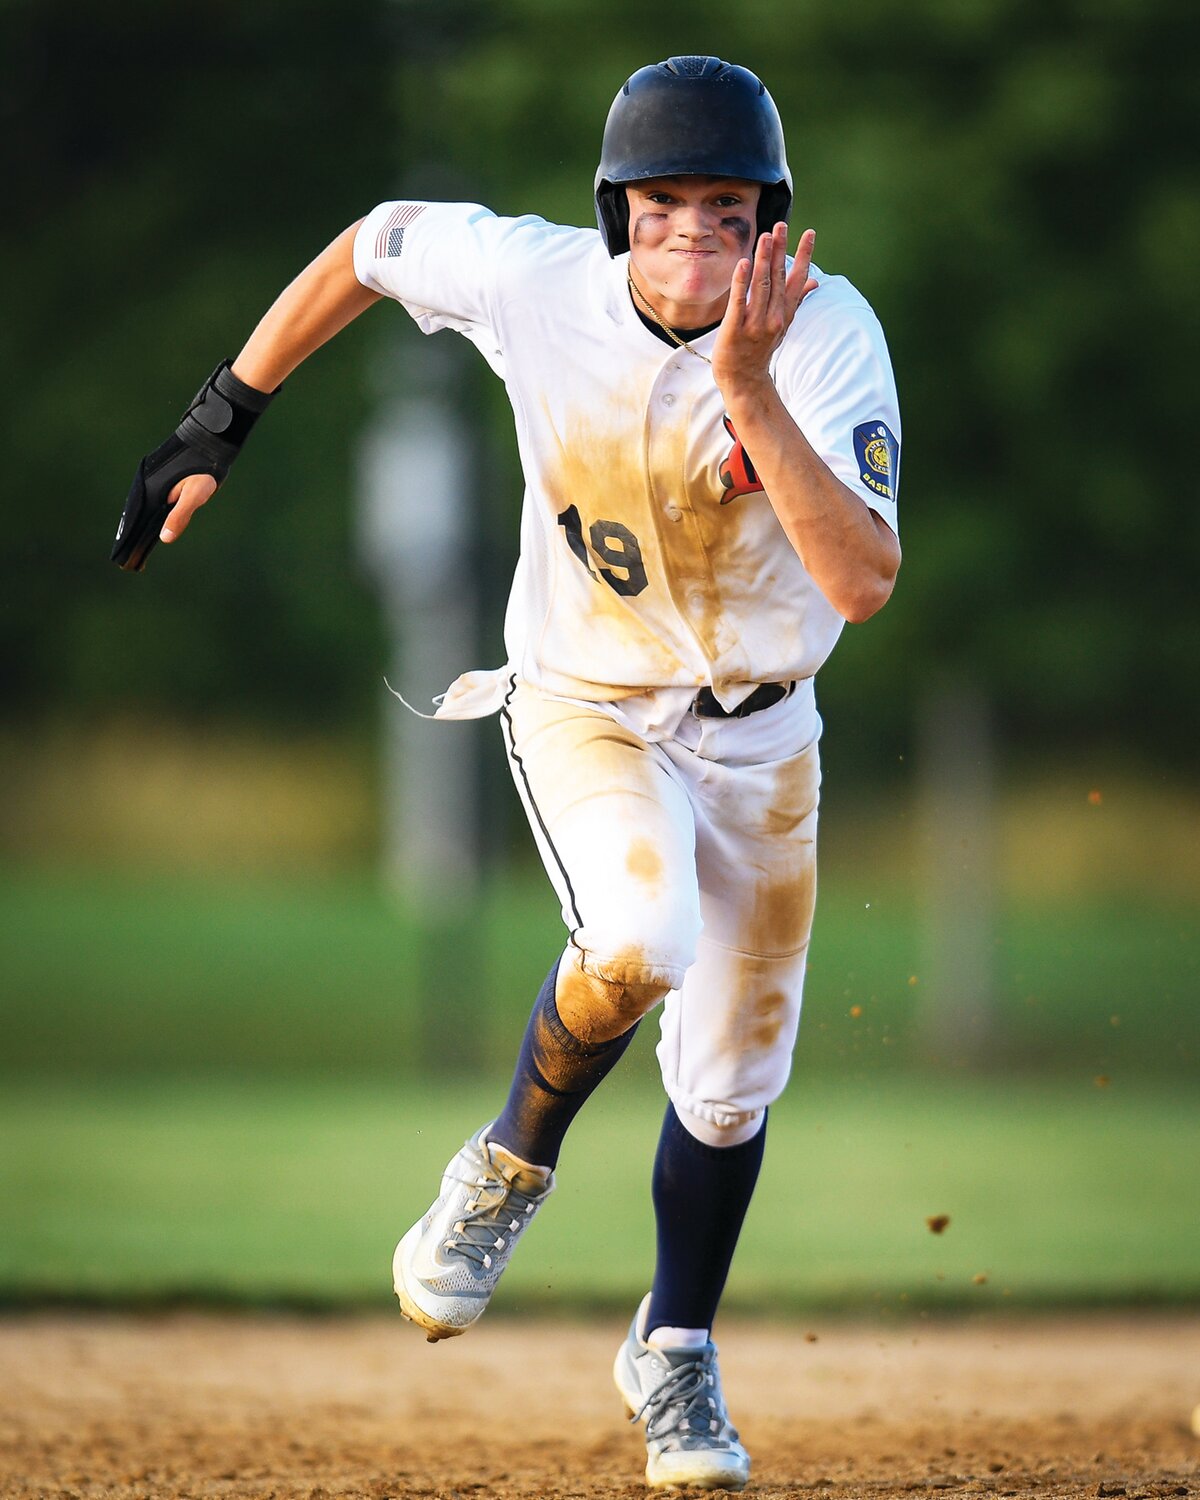 Doylestown’s Ernie Sanchez goes from first to third on a hit in the fifth inning.